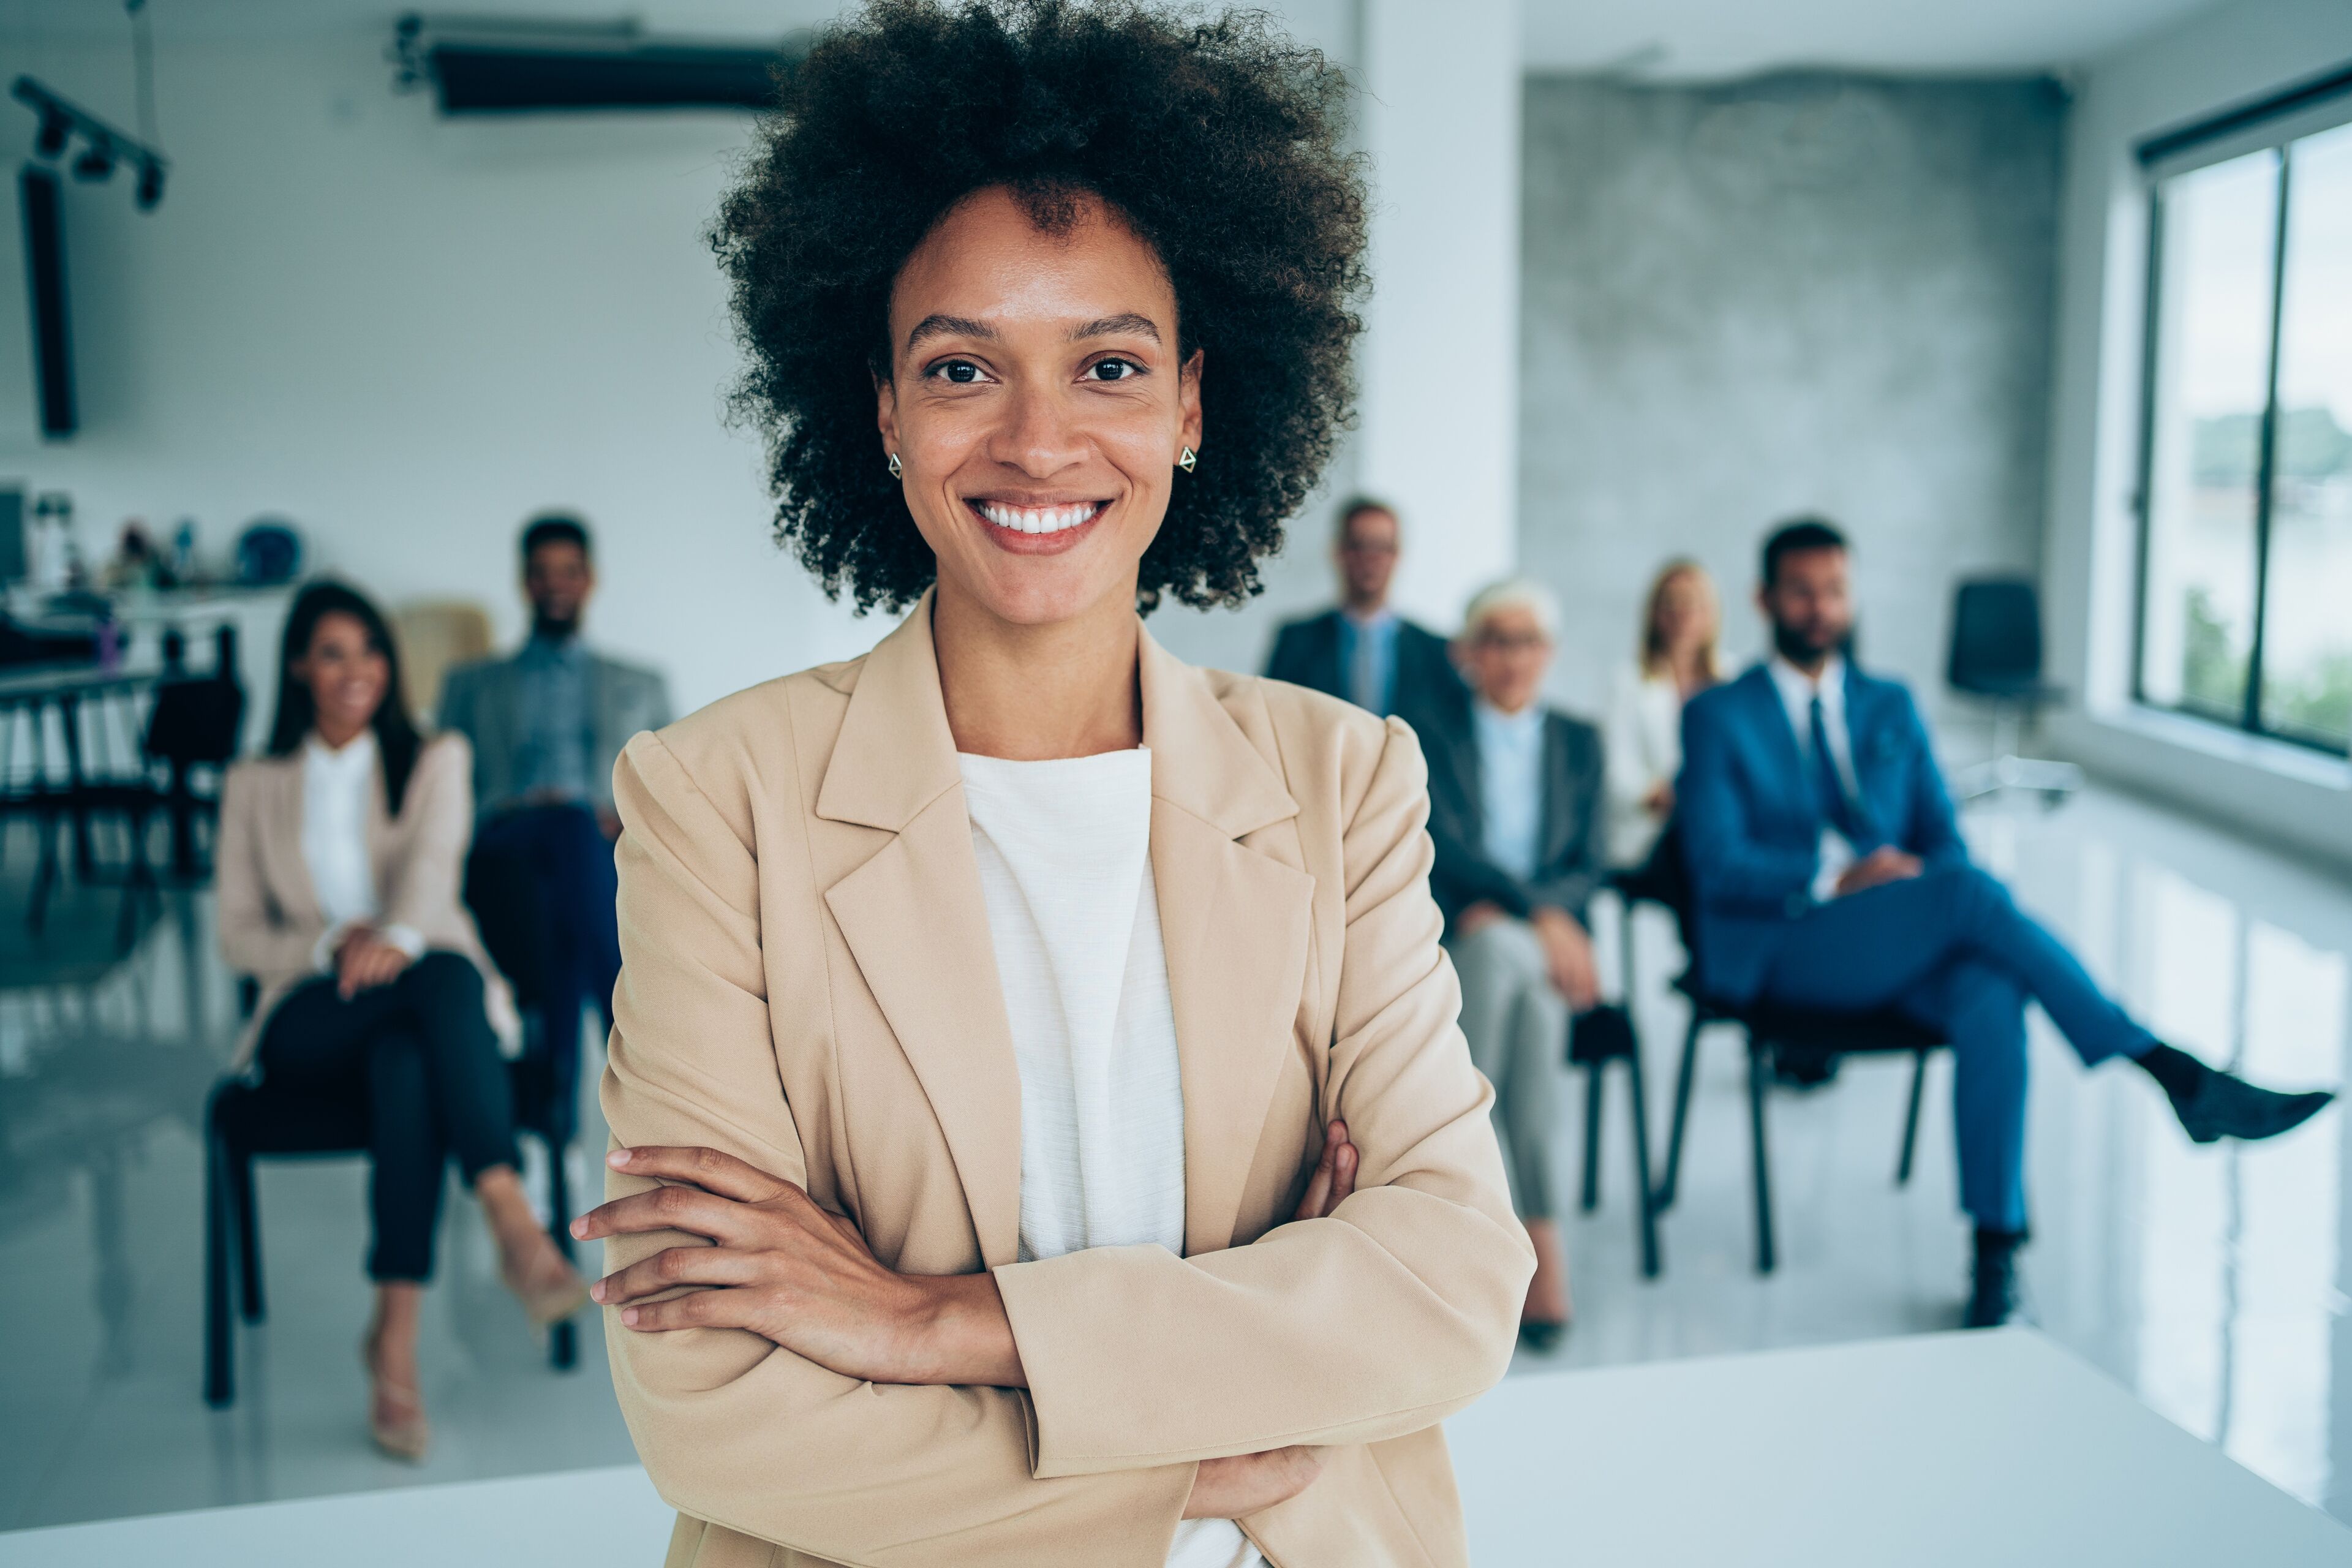 ImageA poised African-American woman with curly hair stands confidently at the forefront, arms crossed, with a team of professionals seated behind her in a modern office setting.